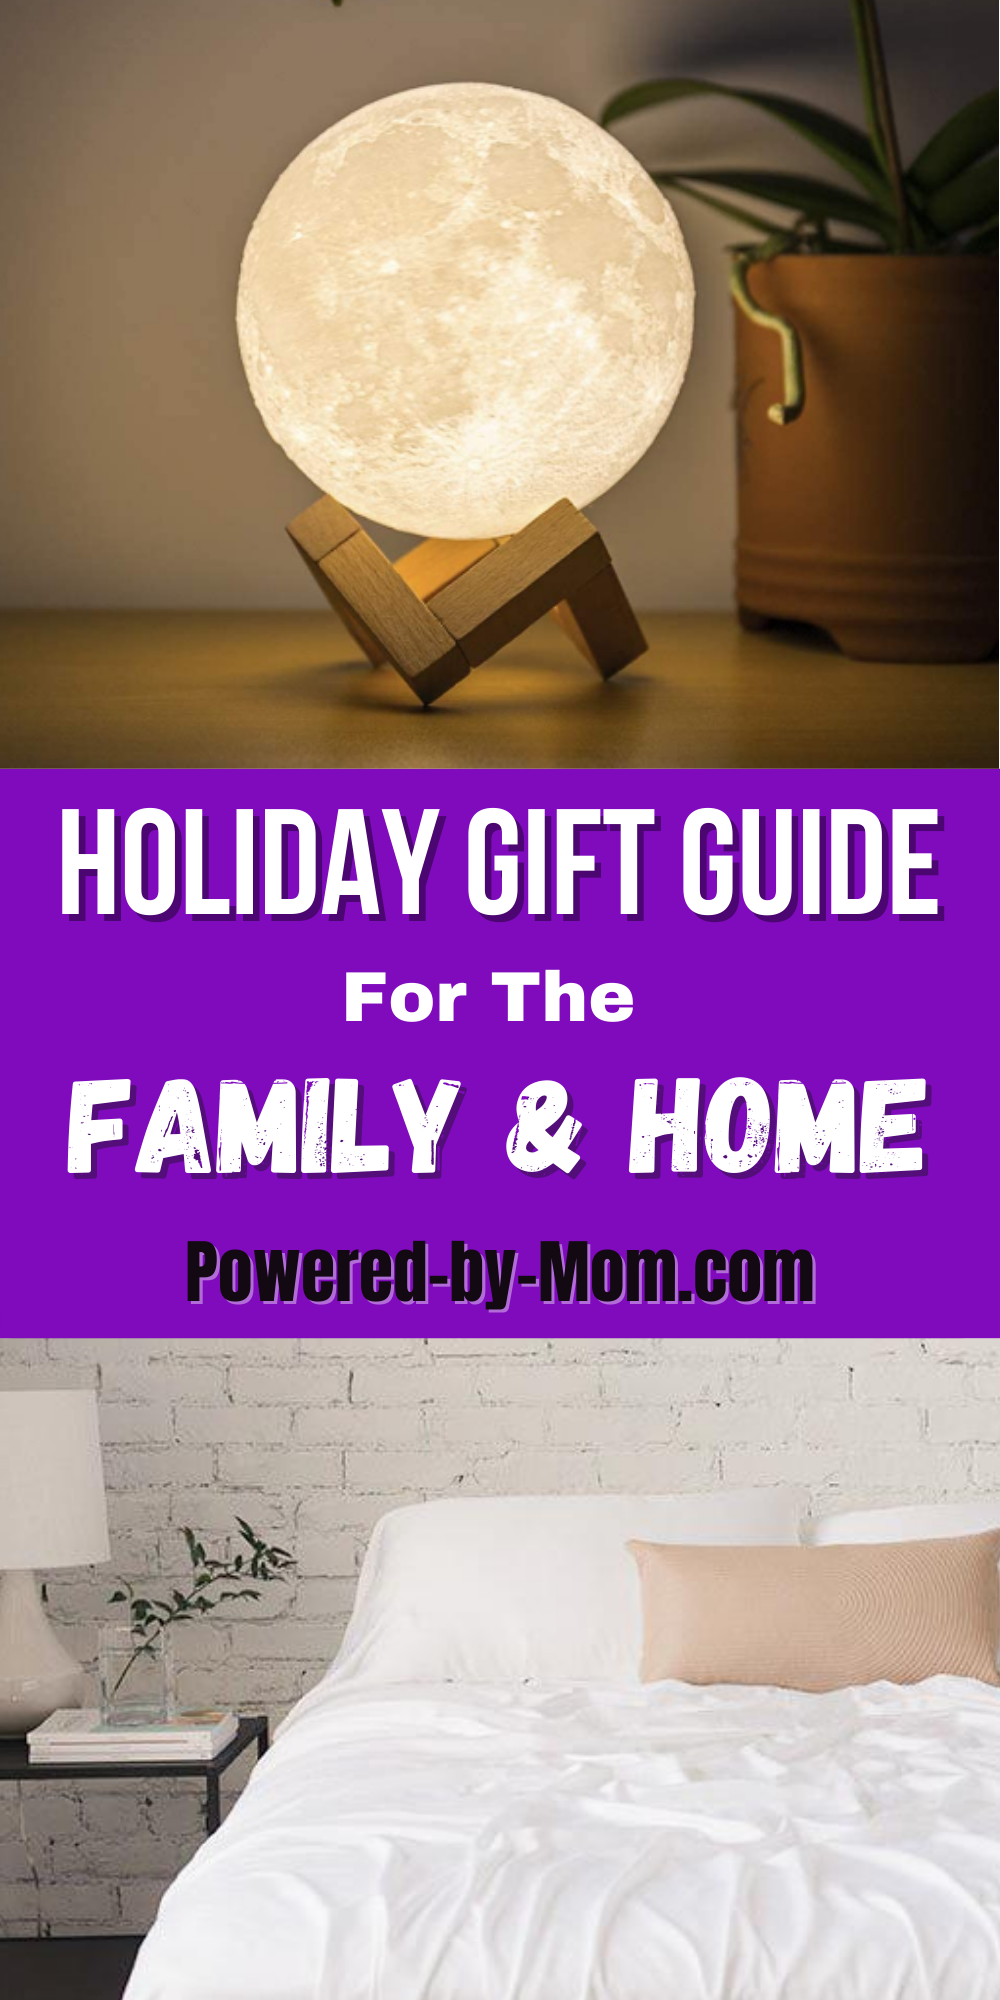 Welcome to Powered by Mom’s 2021 Holiday Gift Guide for the family and the home! WE hope this guide makes your gift shopping easier this year.